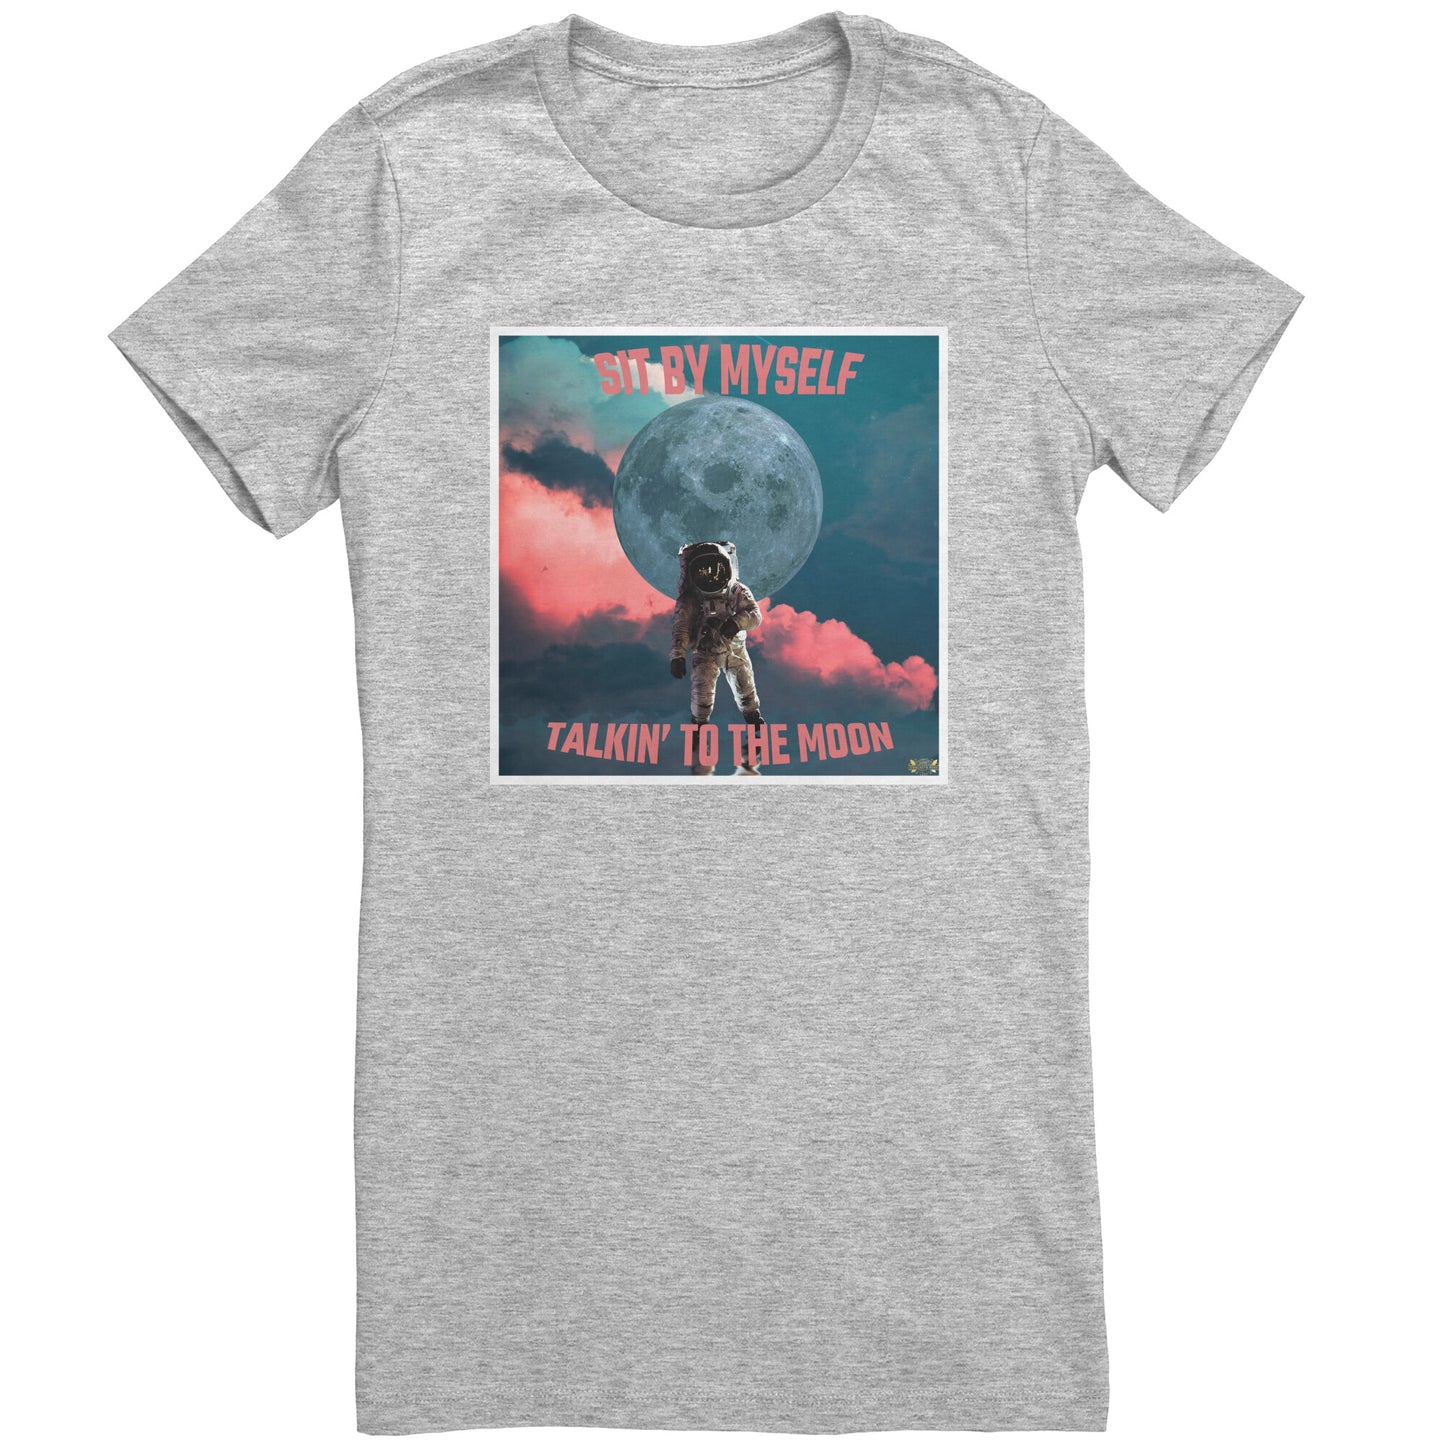 Sit By Myself Talkin' To The Moon Women's T-shirt